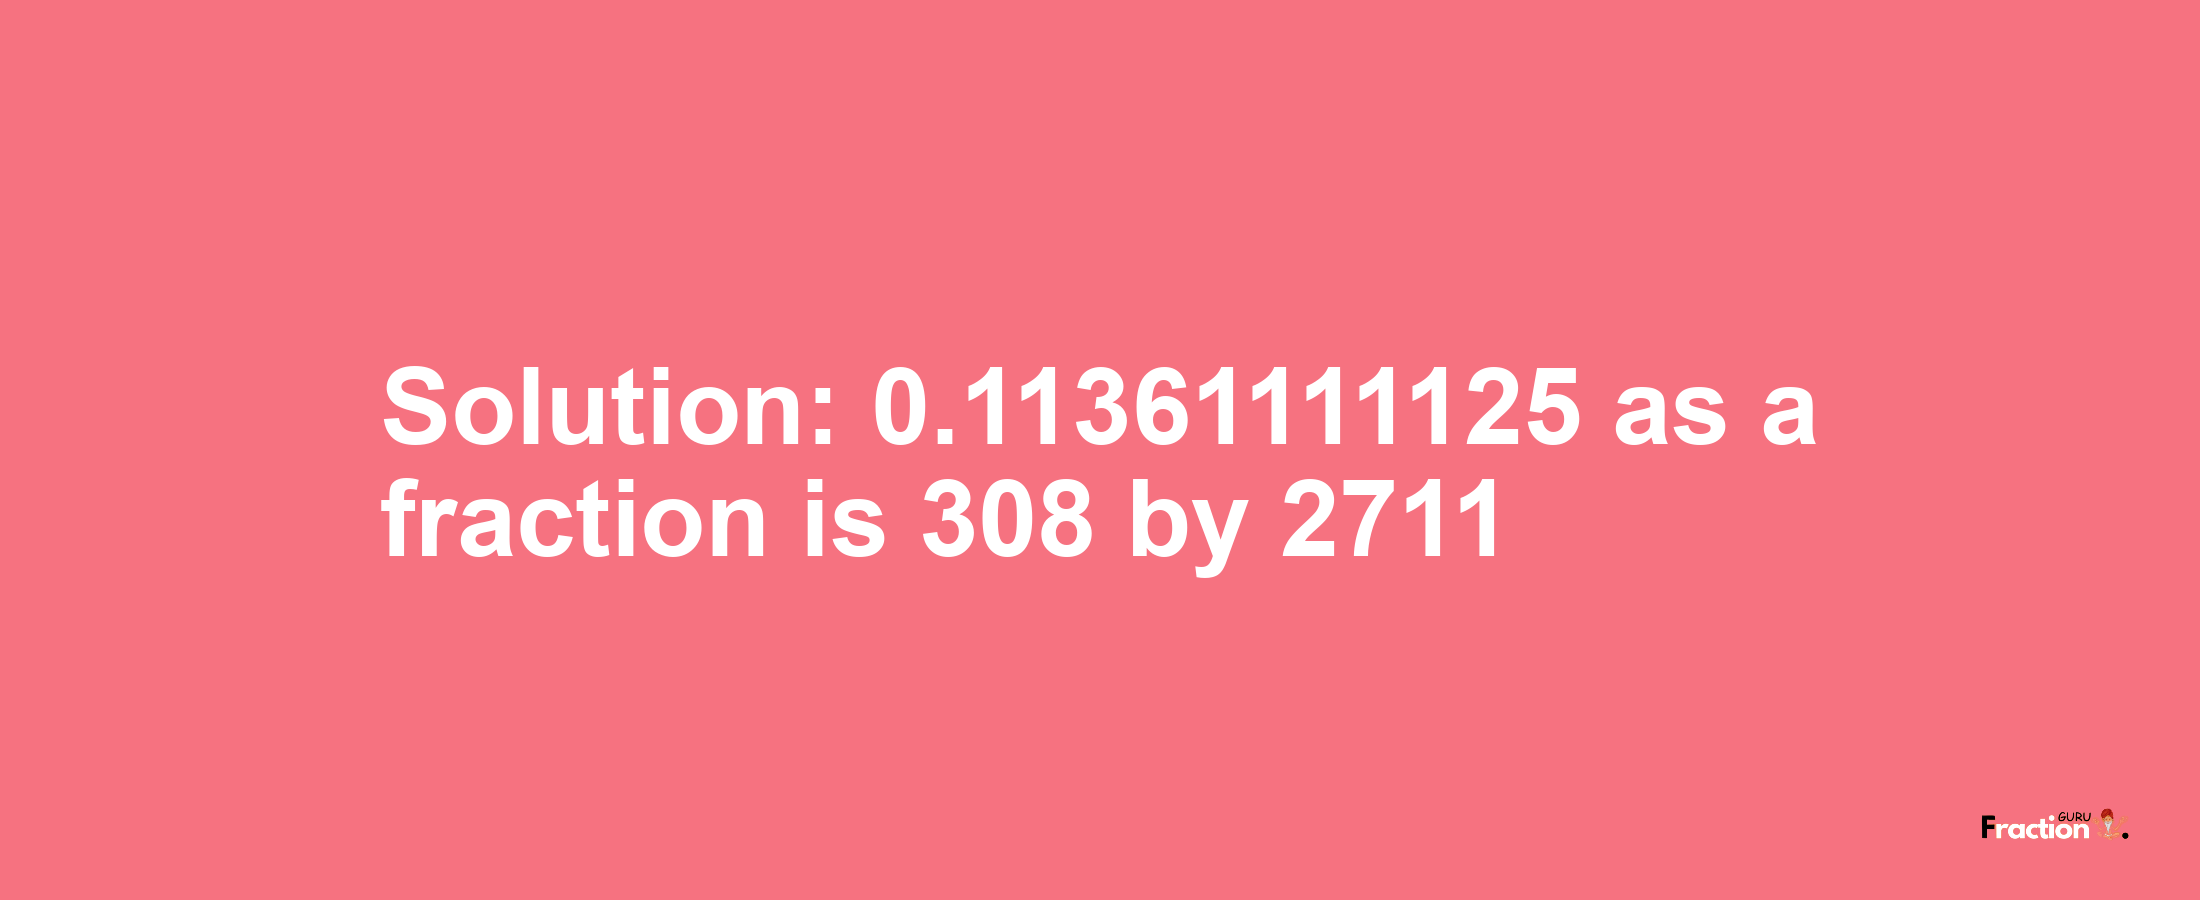 Solution:0.11361111125 as a fraction is 308/2711